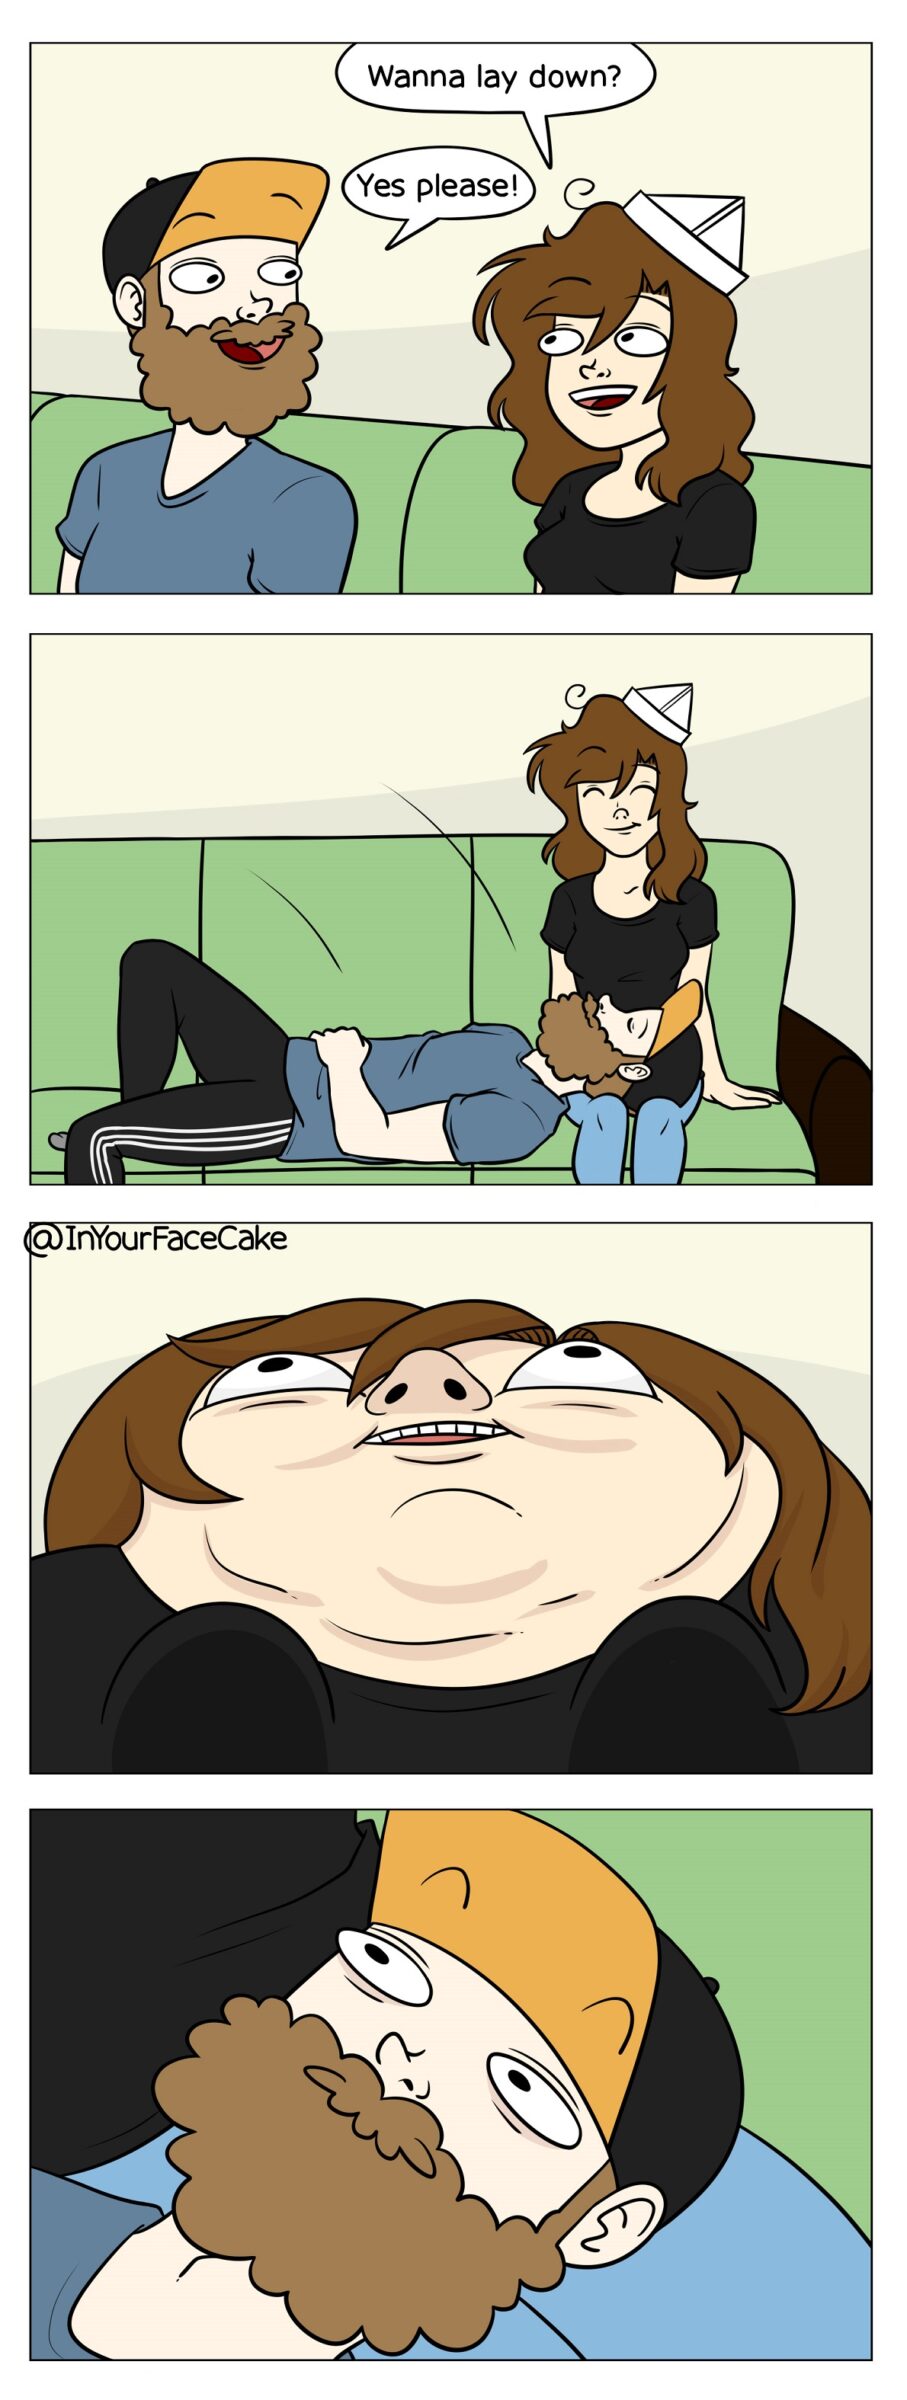 My best angle (from inyourfacecake), InYourFaceCake Comics My best angle (from inyourfacecake), InYourFaceCake text: Wanna lay down? Yes please! InYourFaceCake 